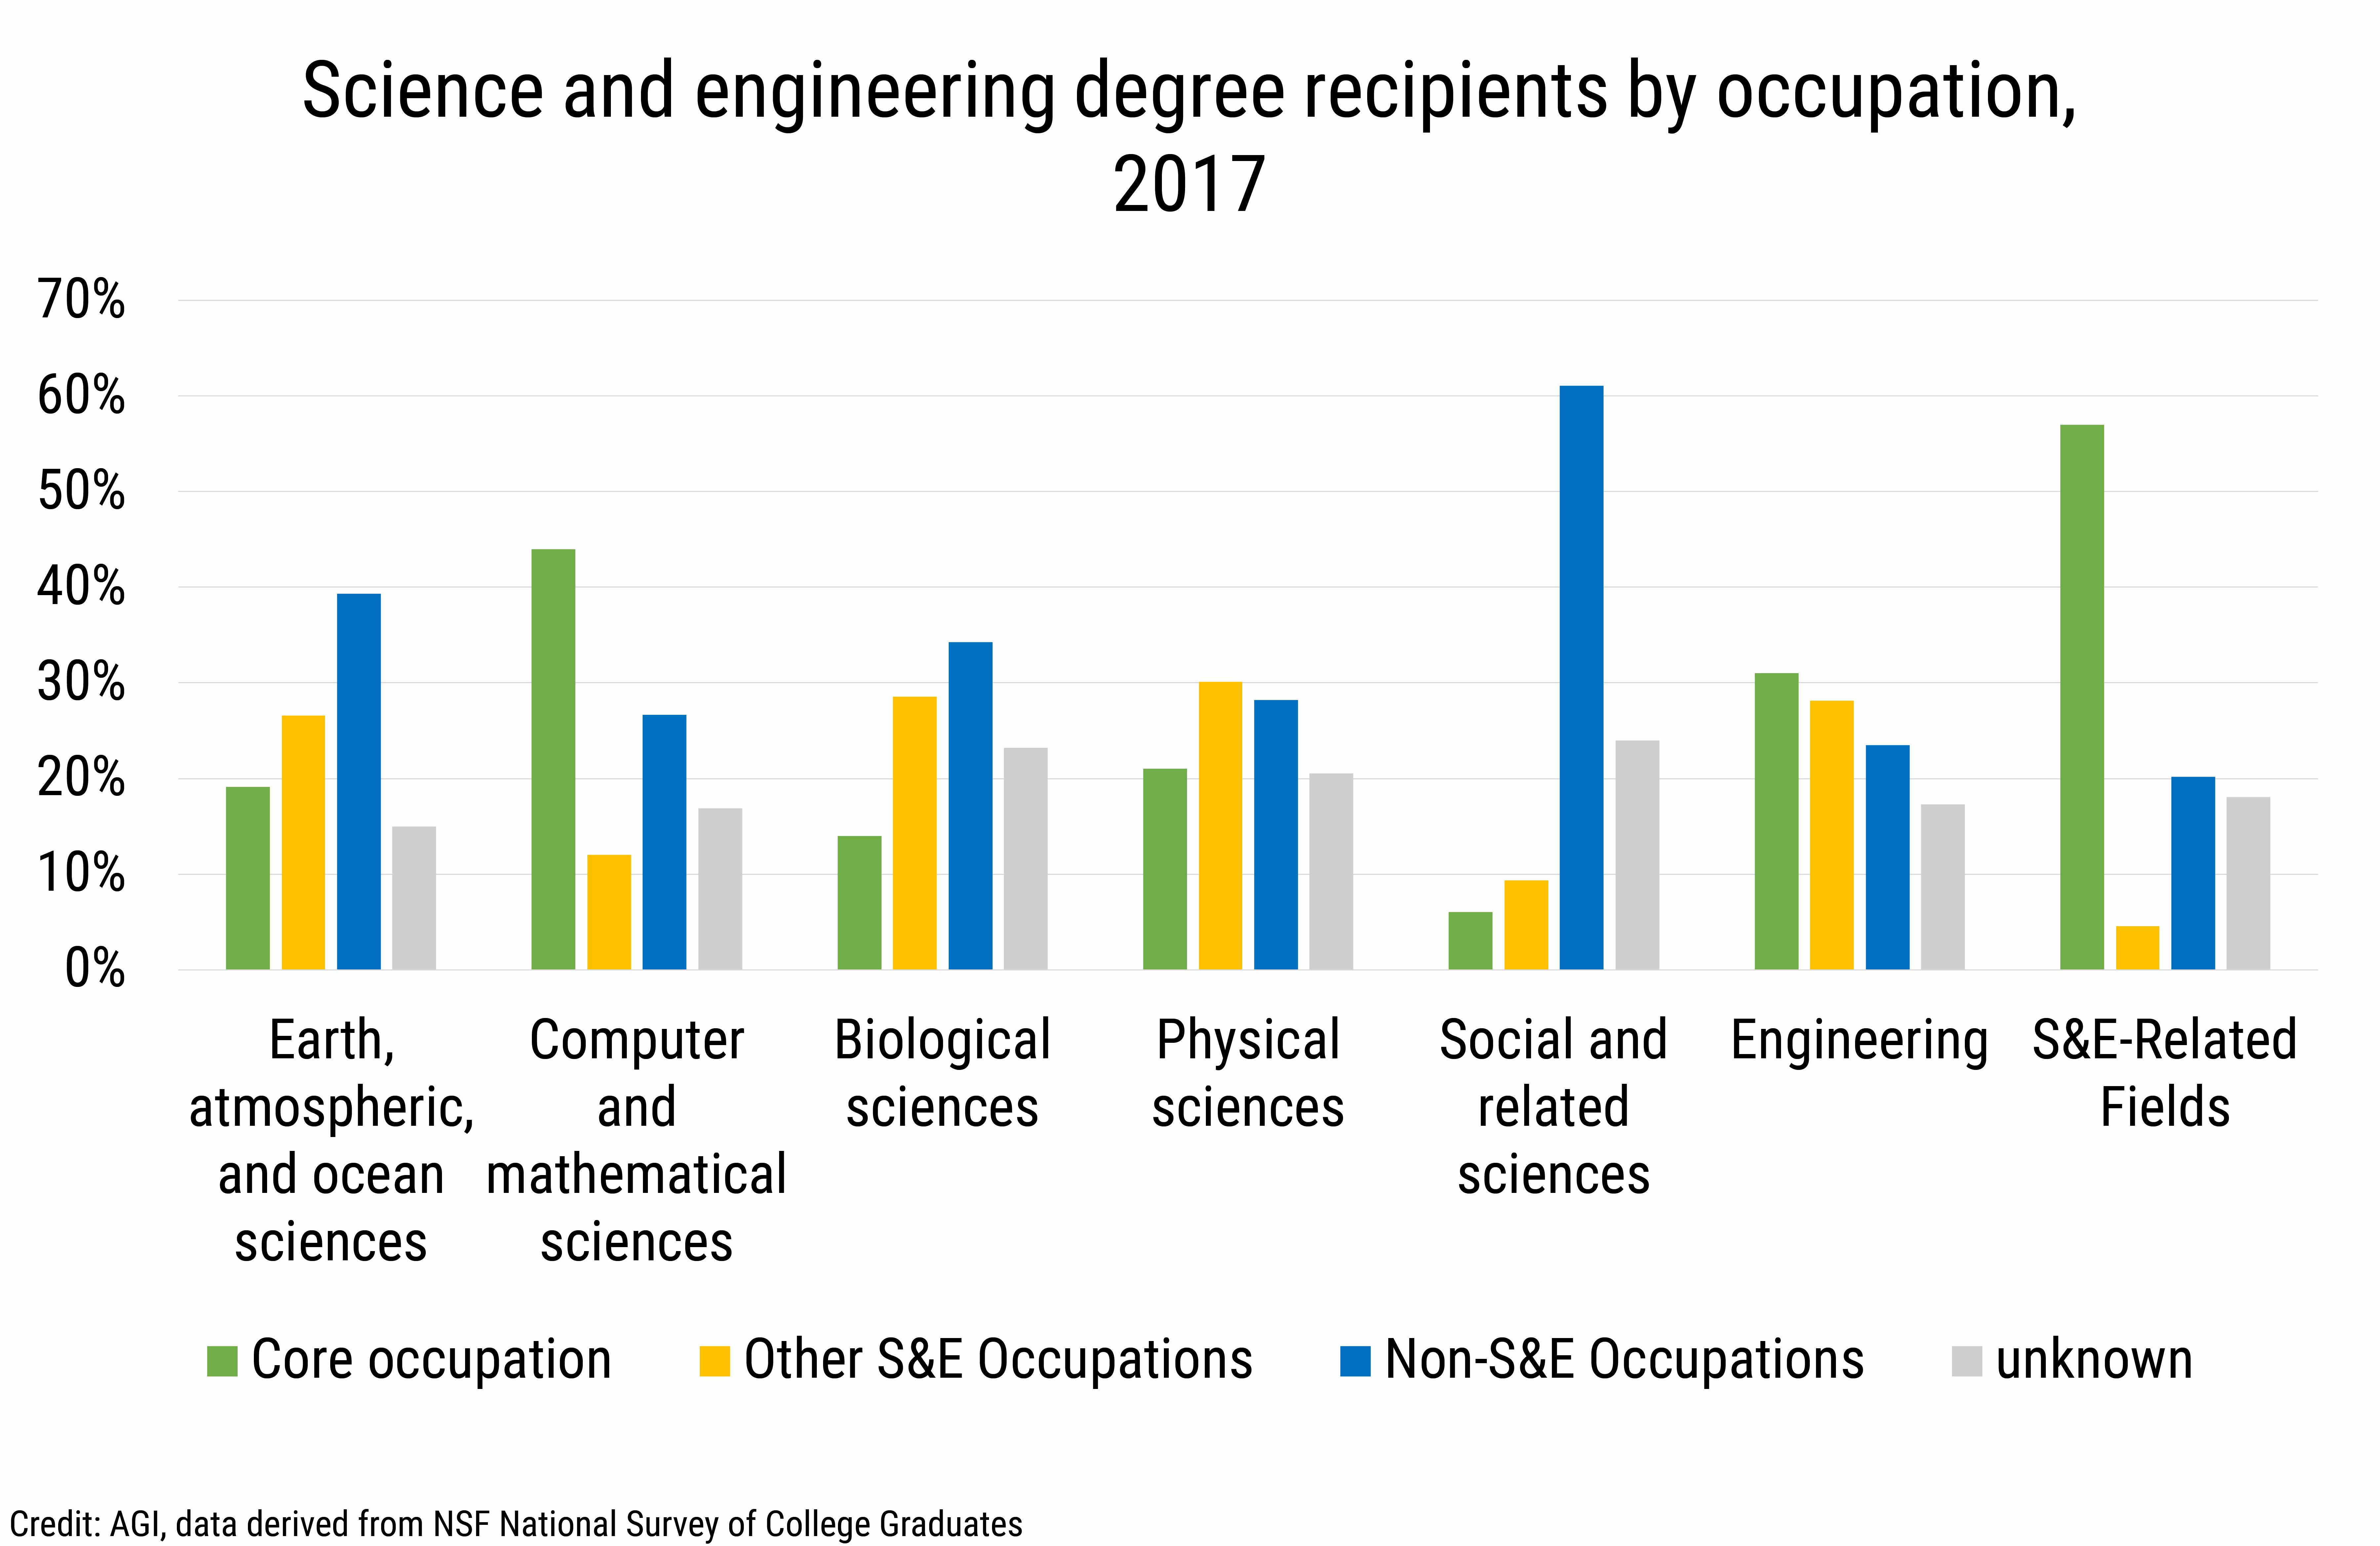 DB2020-023 chart11-Science and engineering degree recipients by occupation, 2017 (Credit: AGI, data derived from NSF National Survey of College Graduates)